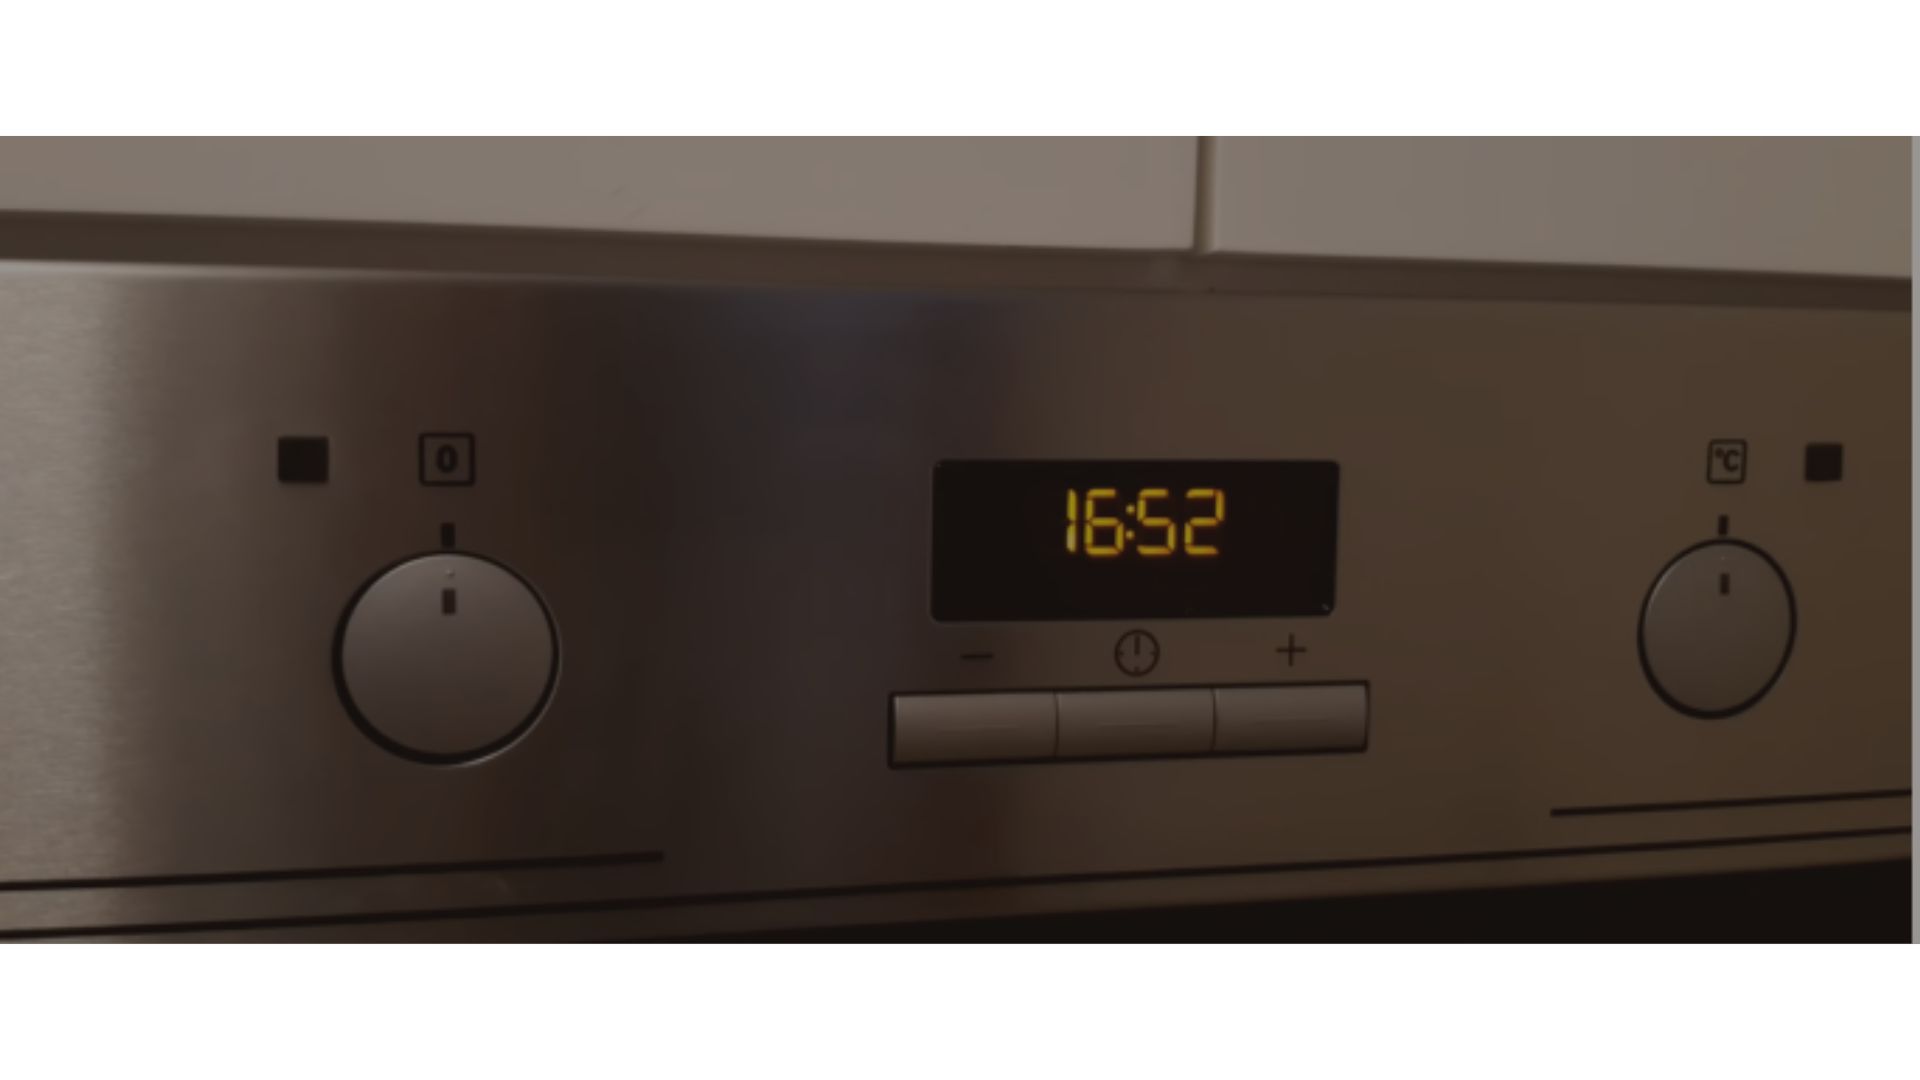 electrolux oven keeps tripping, beeping and turning off